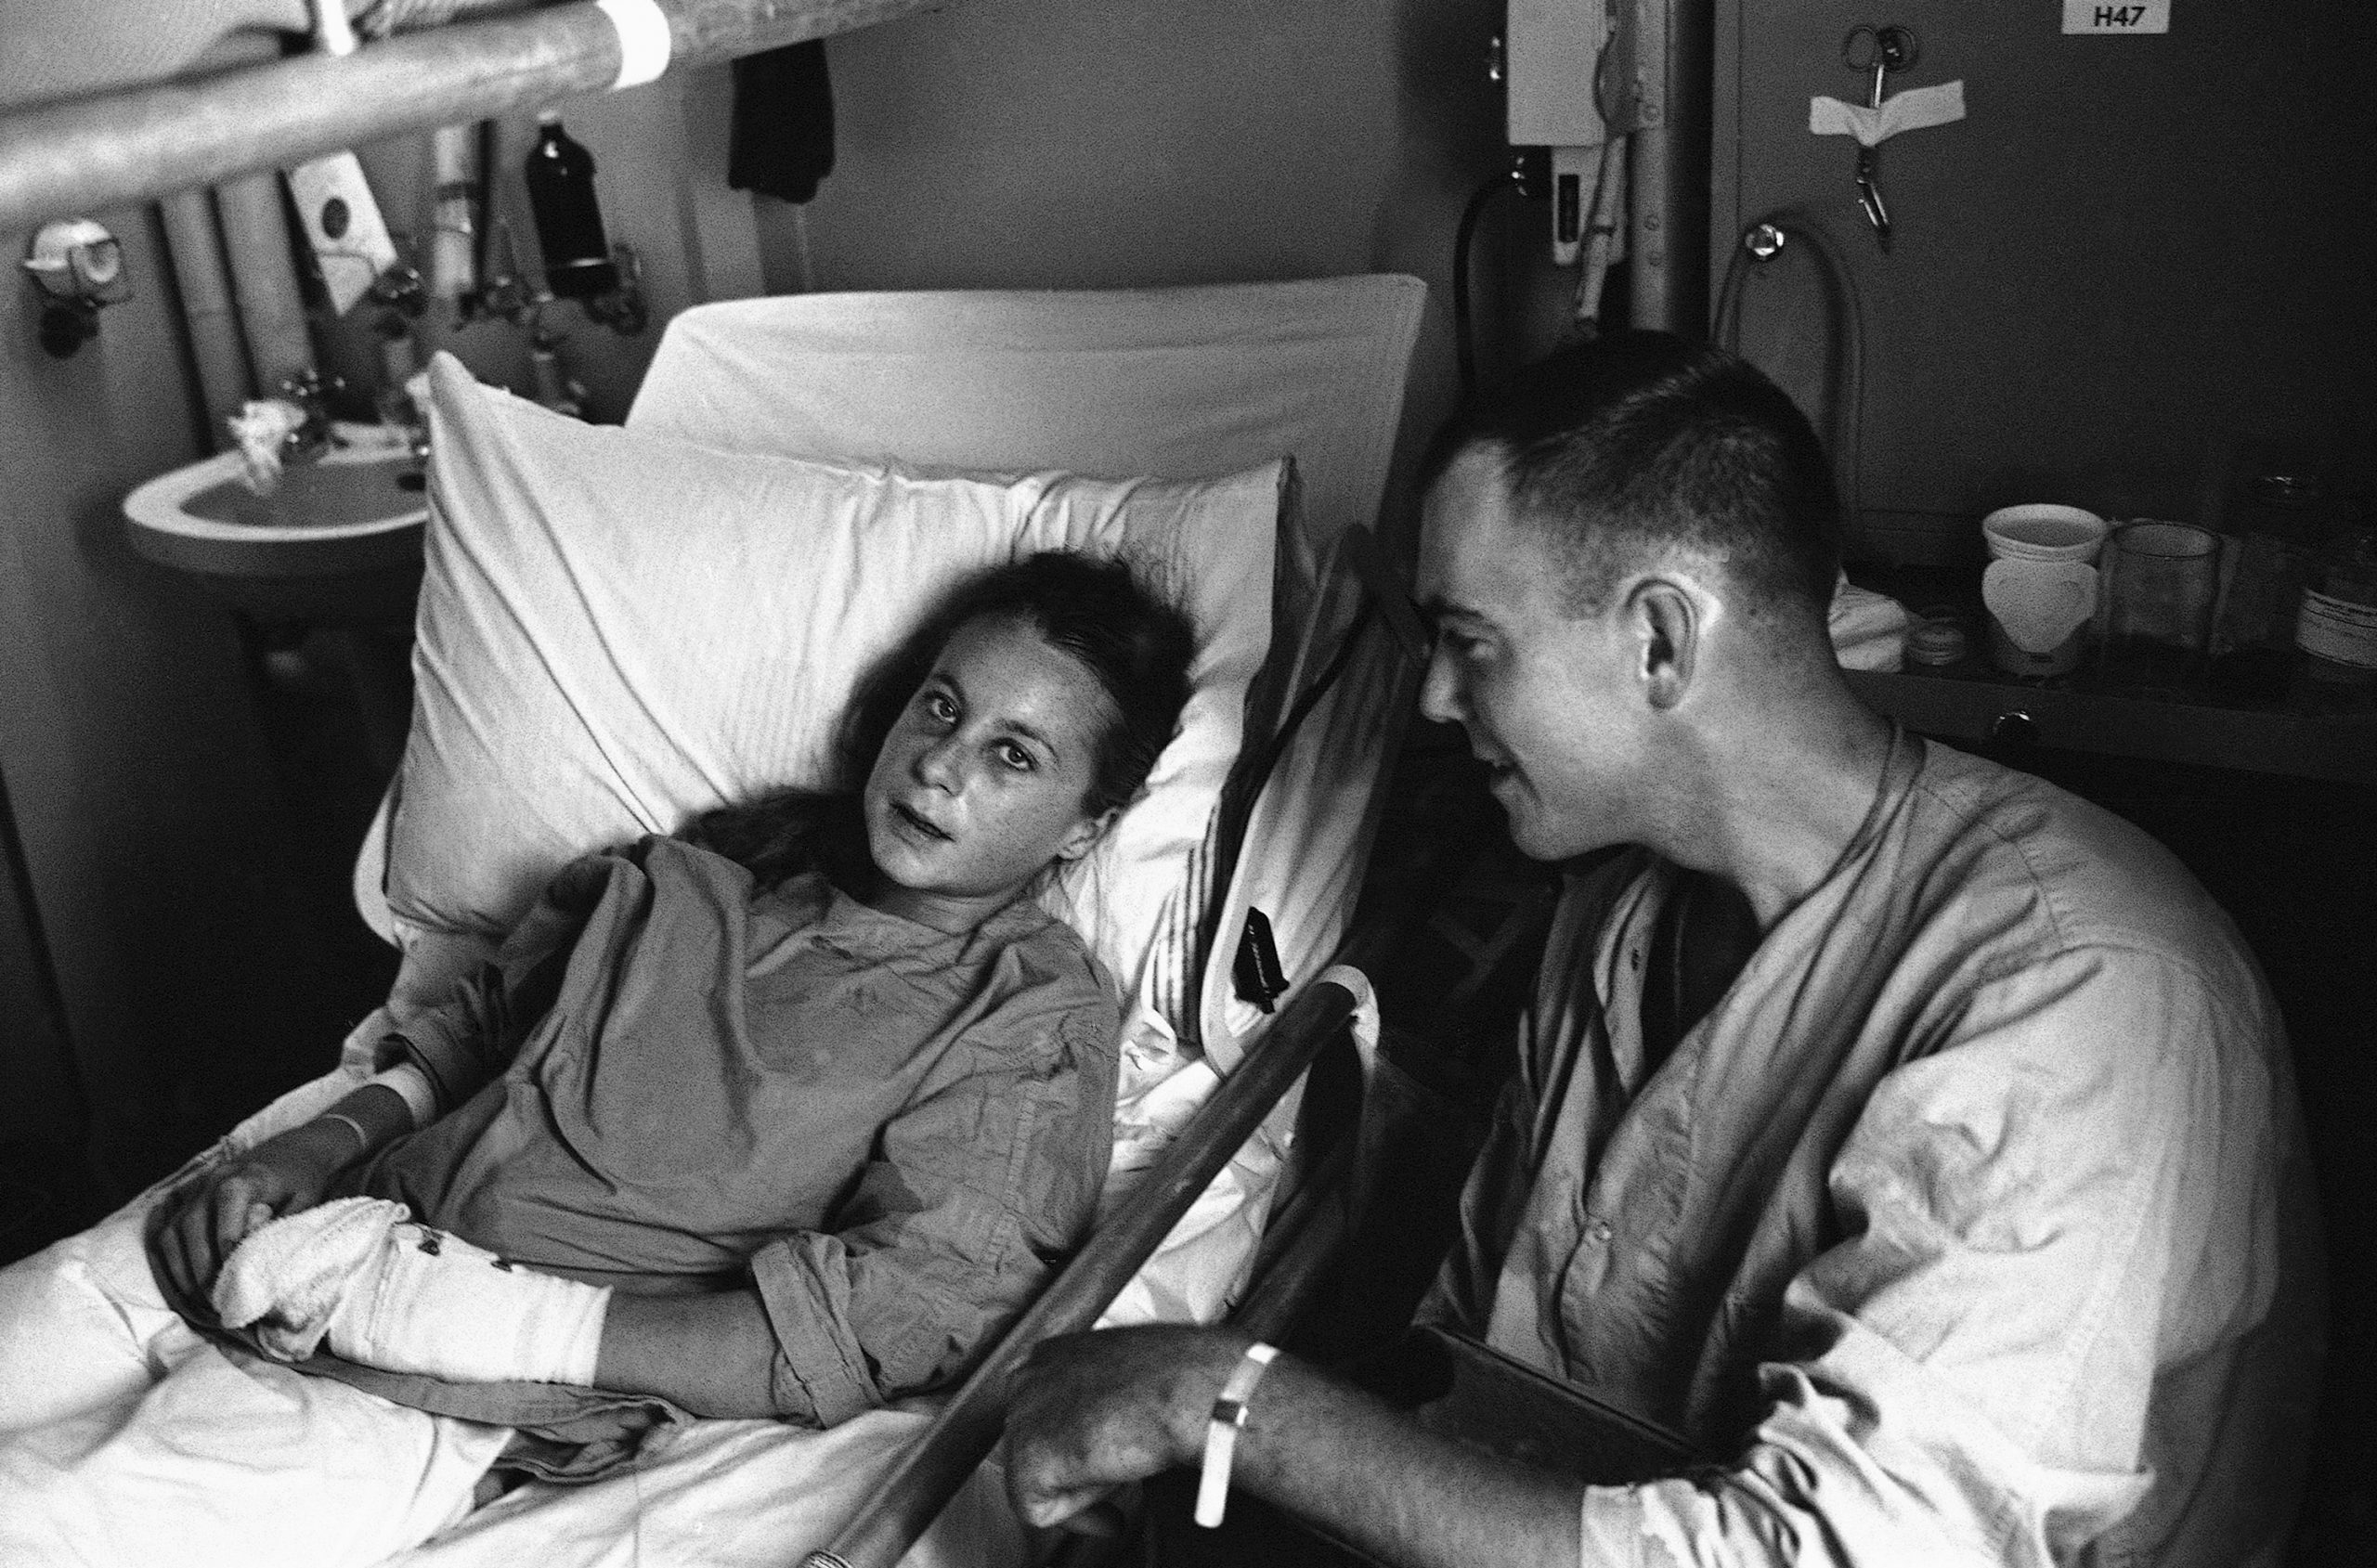 French freelance photographer Catherine Leroy talks with Lt. Robert Brown on May 28, 1967, 23, of New York’s Staten Island from hospital bed aboard hospital ships USS Sanctuary in South China sea off Vietnamese coast. Both were wounded by same North Vietnamese mortar blast on May 19. She was photographing U.S. Marines moving toward the demilitarized zone at the time. Brown was first man to reach Catherine, and despite his own arm wound, gave her first aid and brought her out of the battlefield. She suffered multiple shrapnel wounds and a fractured jaw. (AP Photo)